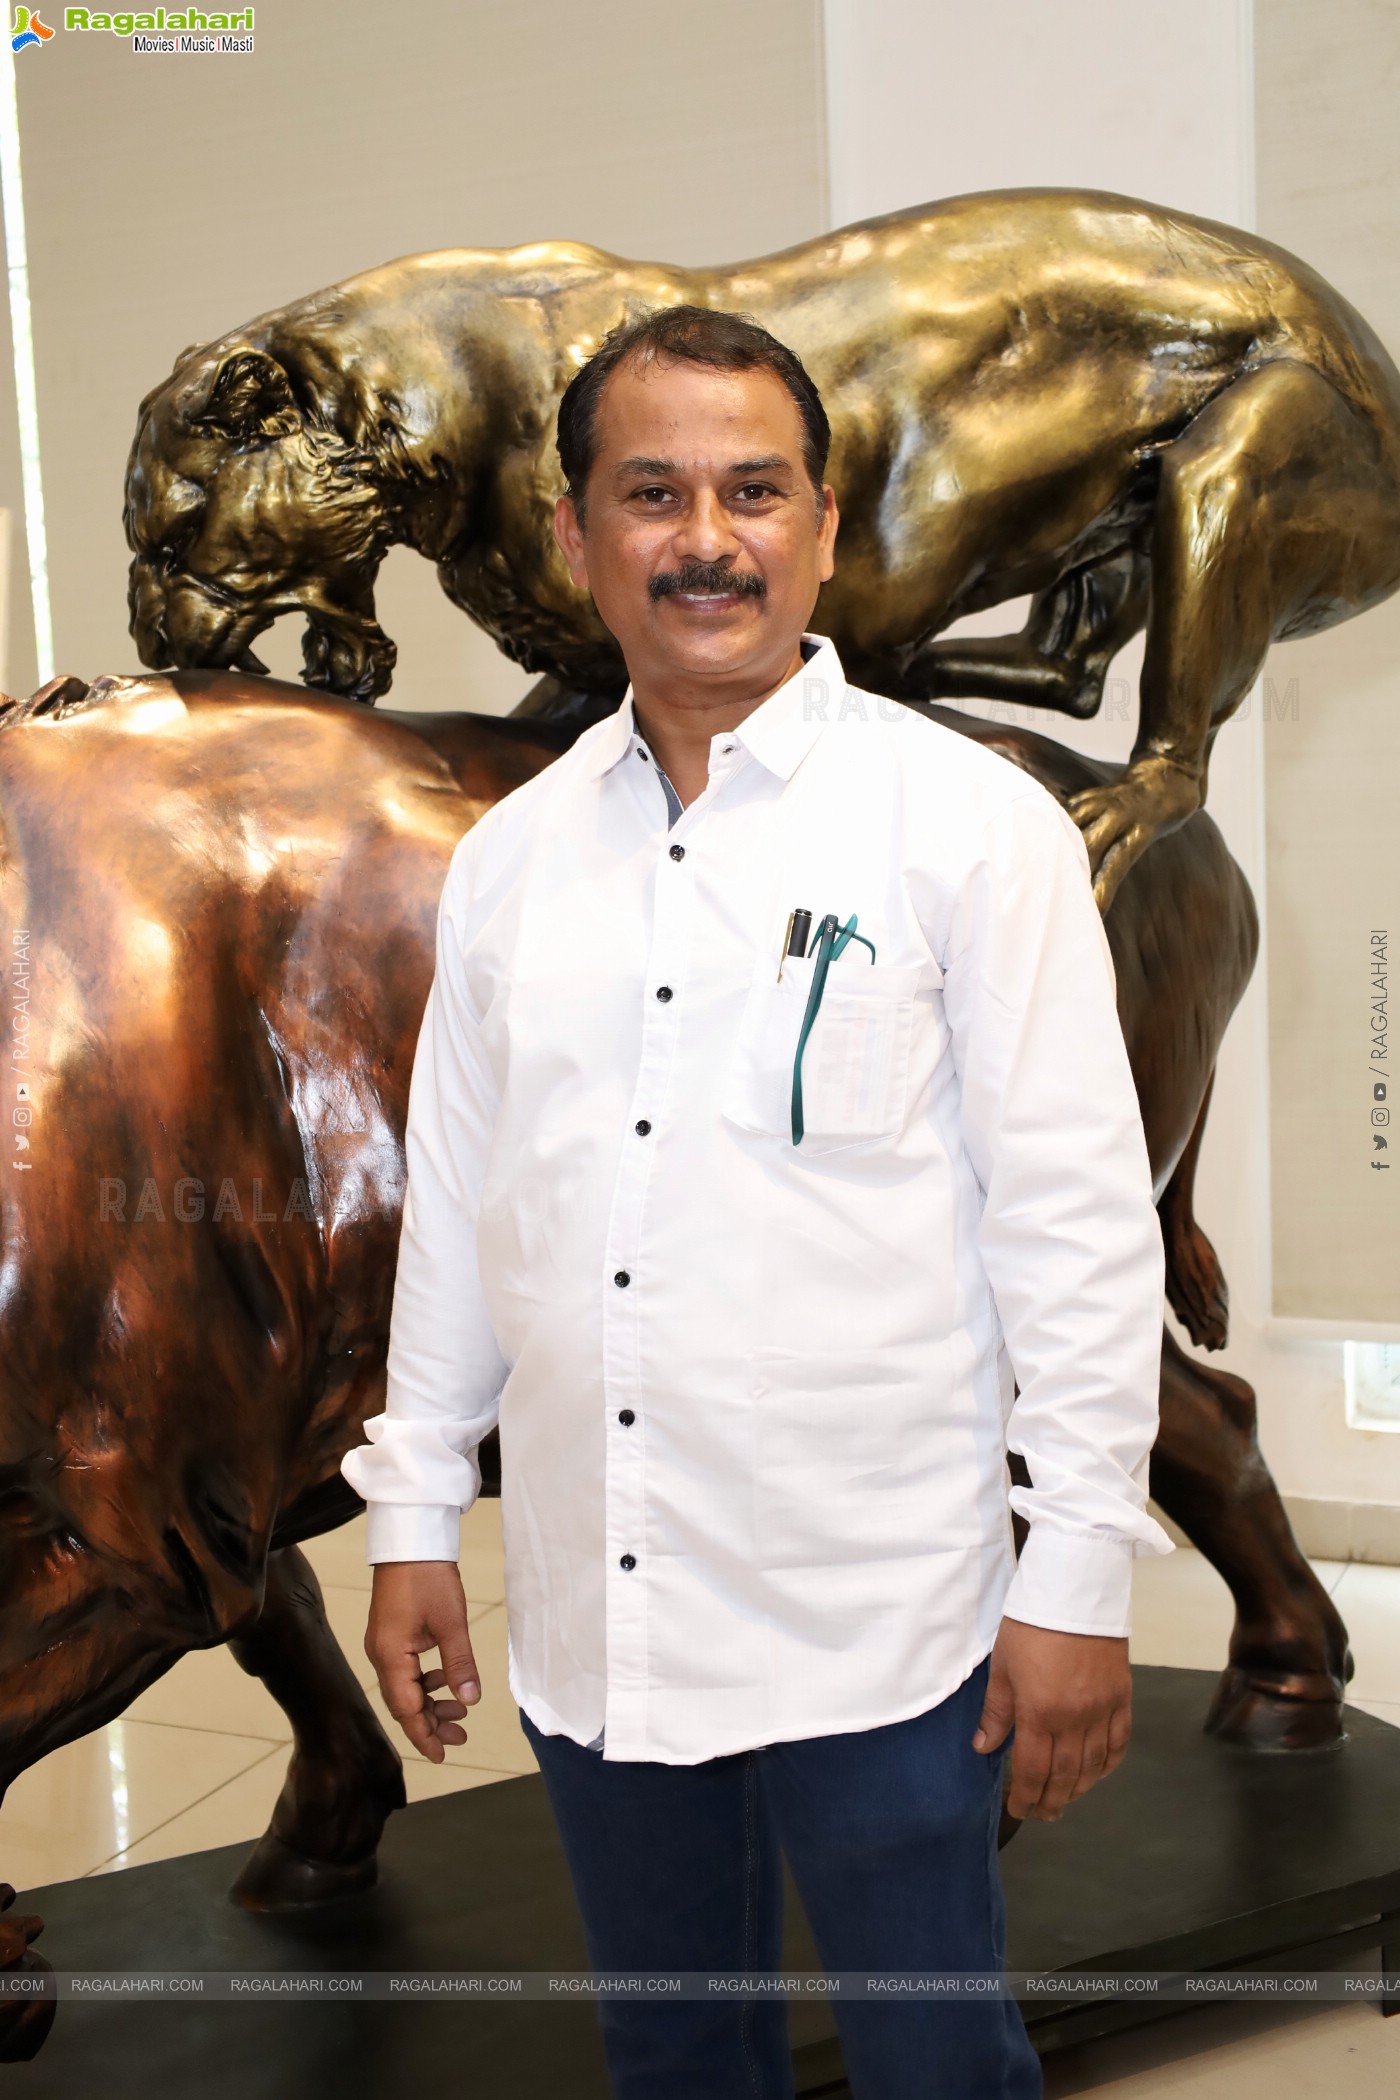 State Art Gallery - Exhibition of Paintings and Inauguration Event